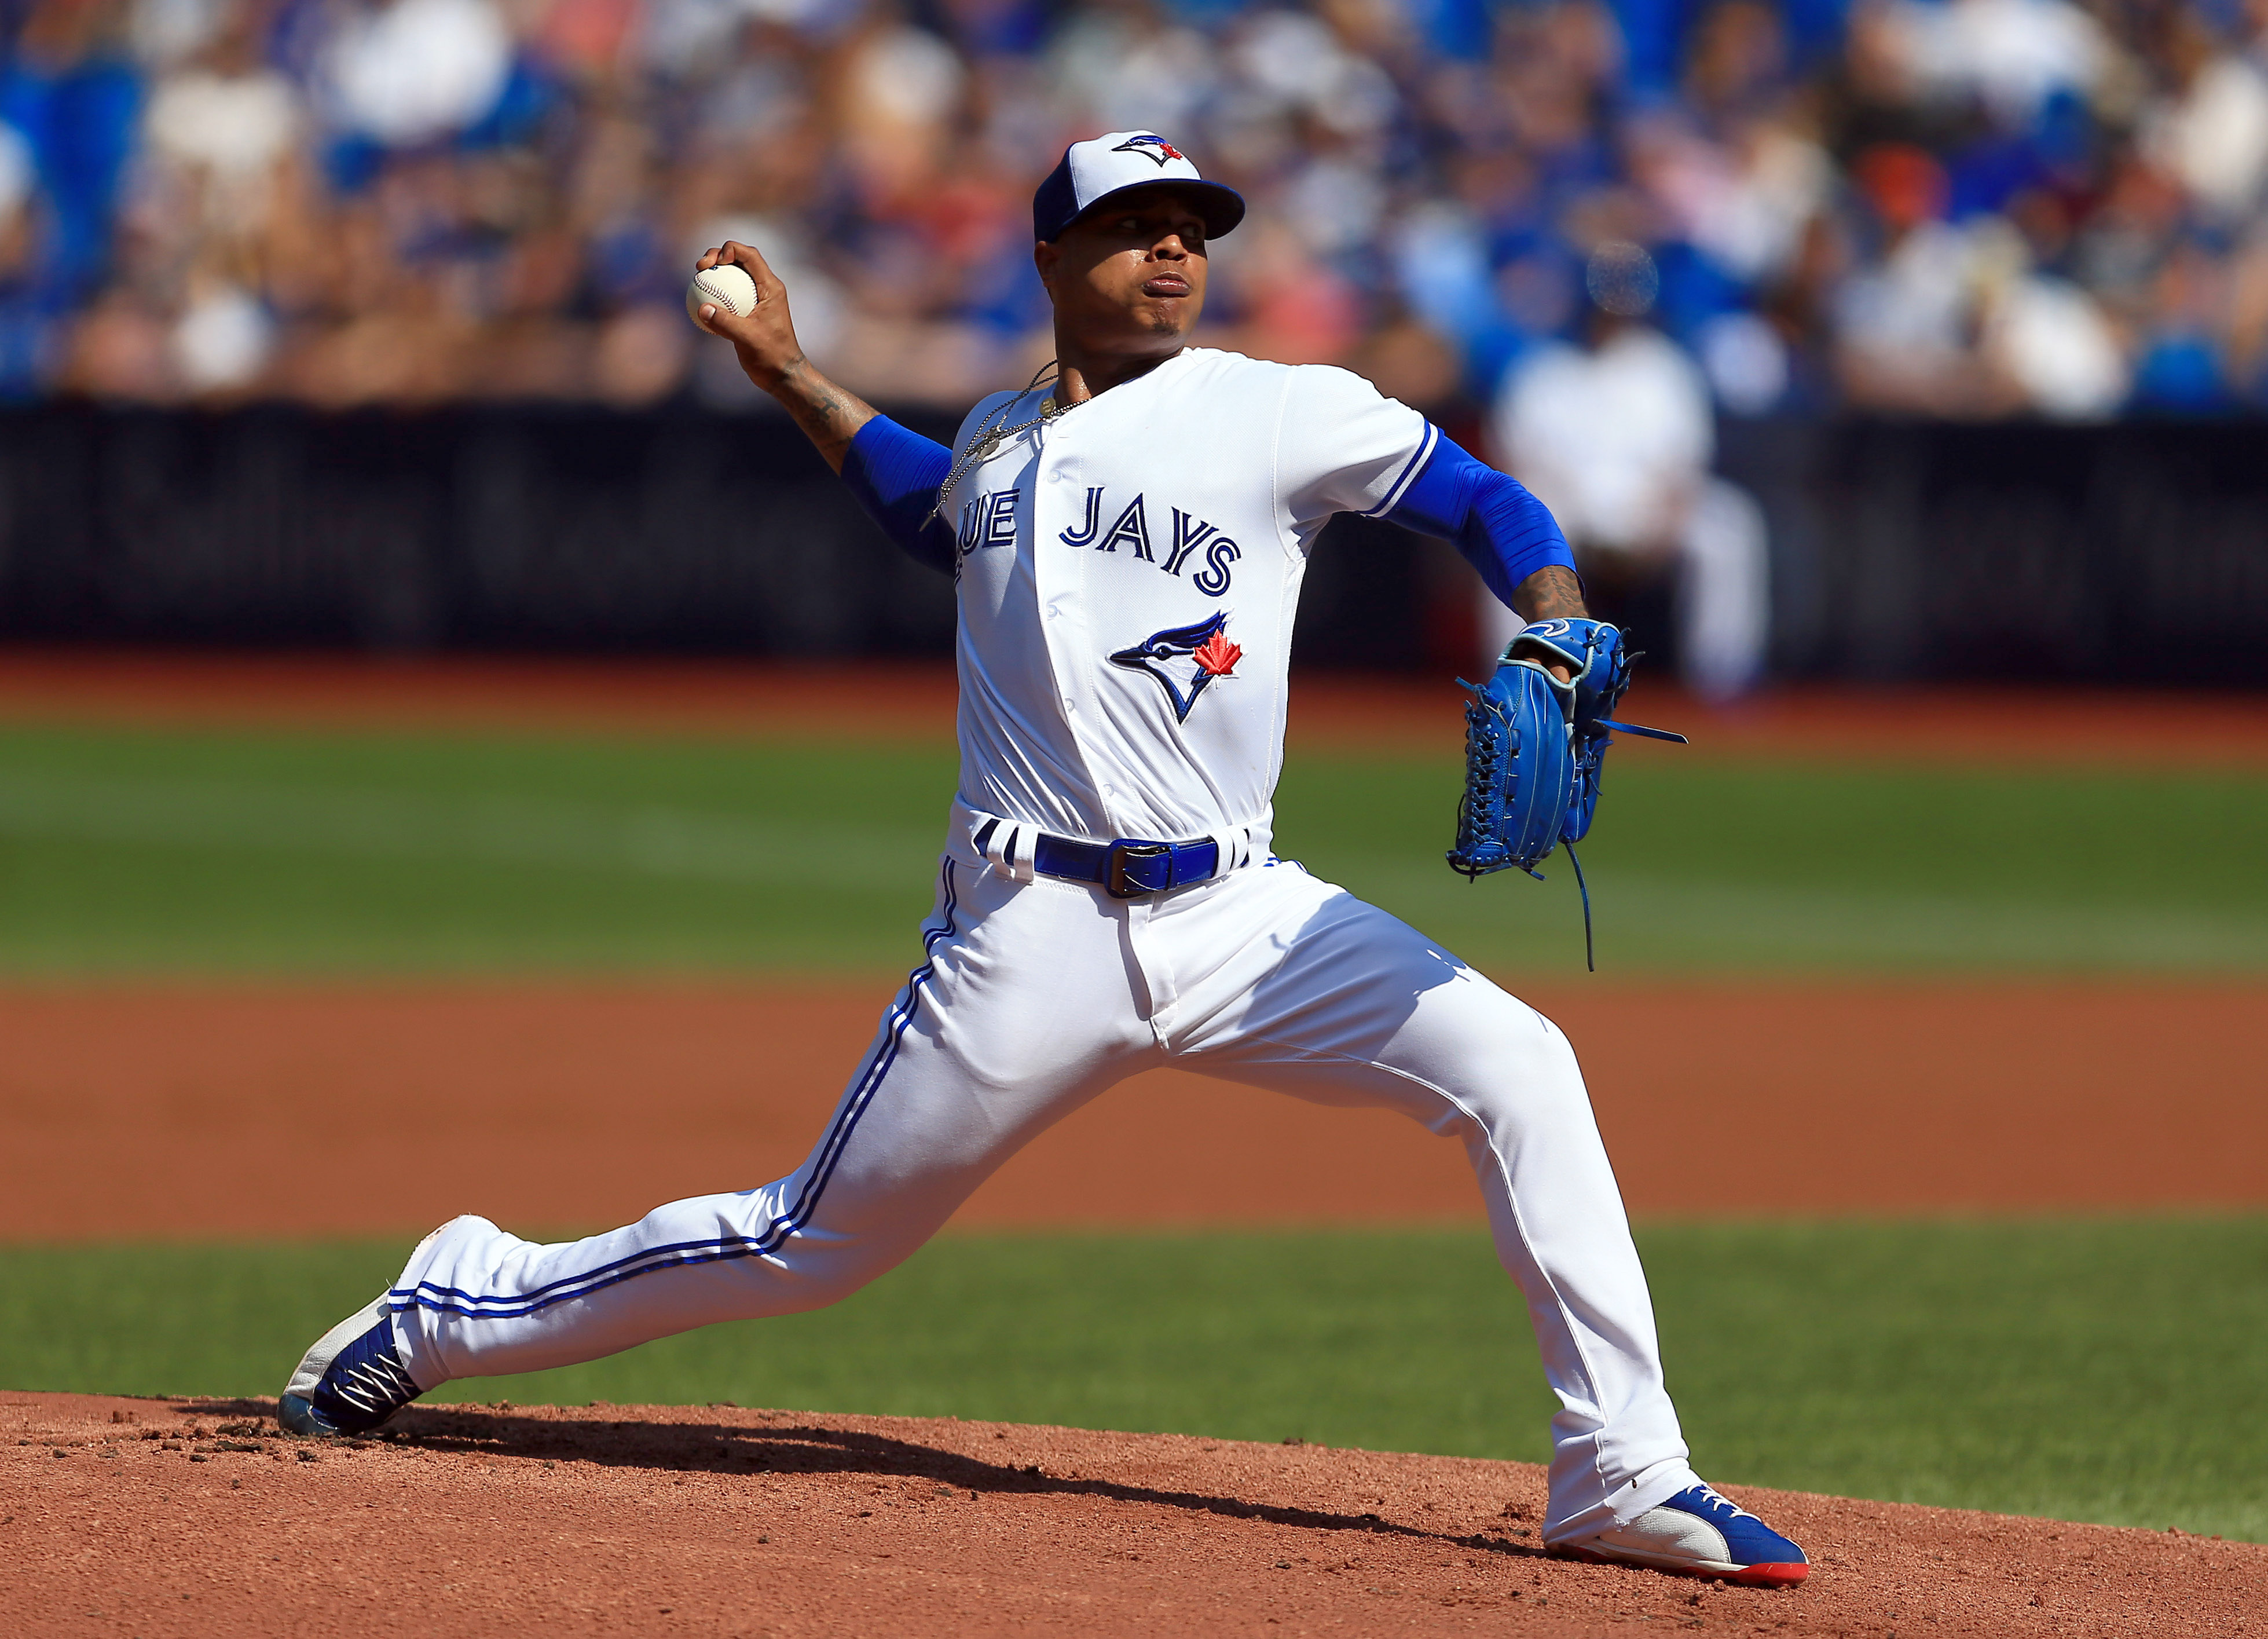 Toronto Blue Jays: Expect big things from Marcus Stroman in 2018